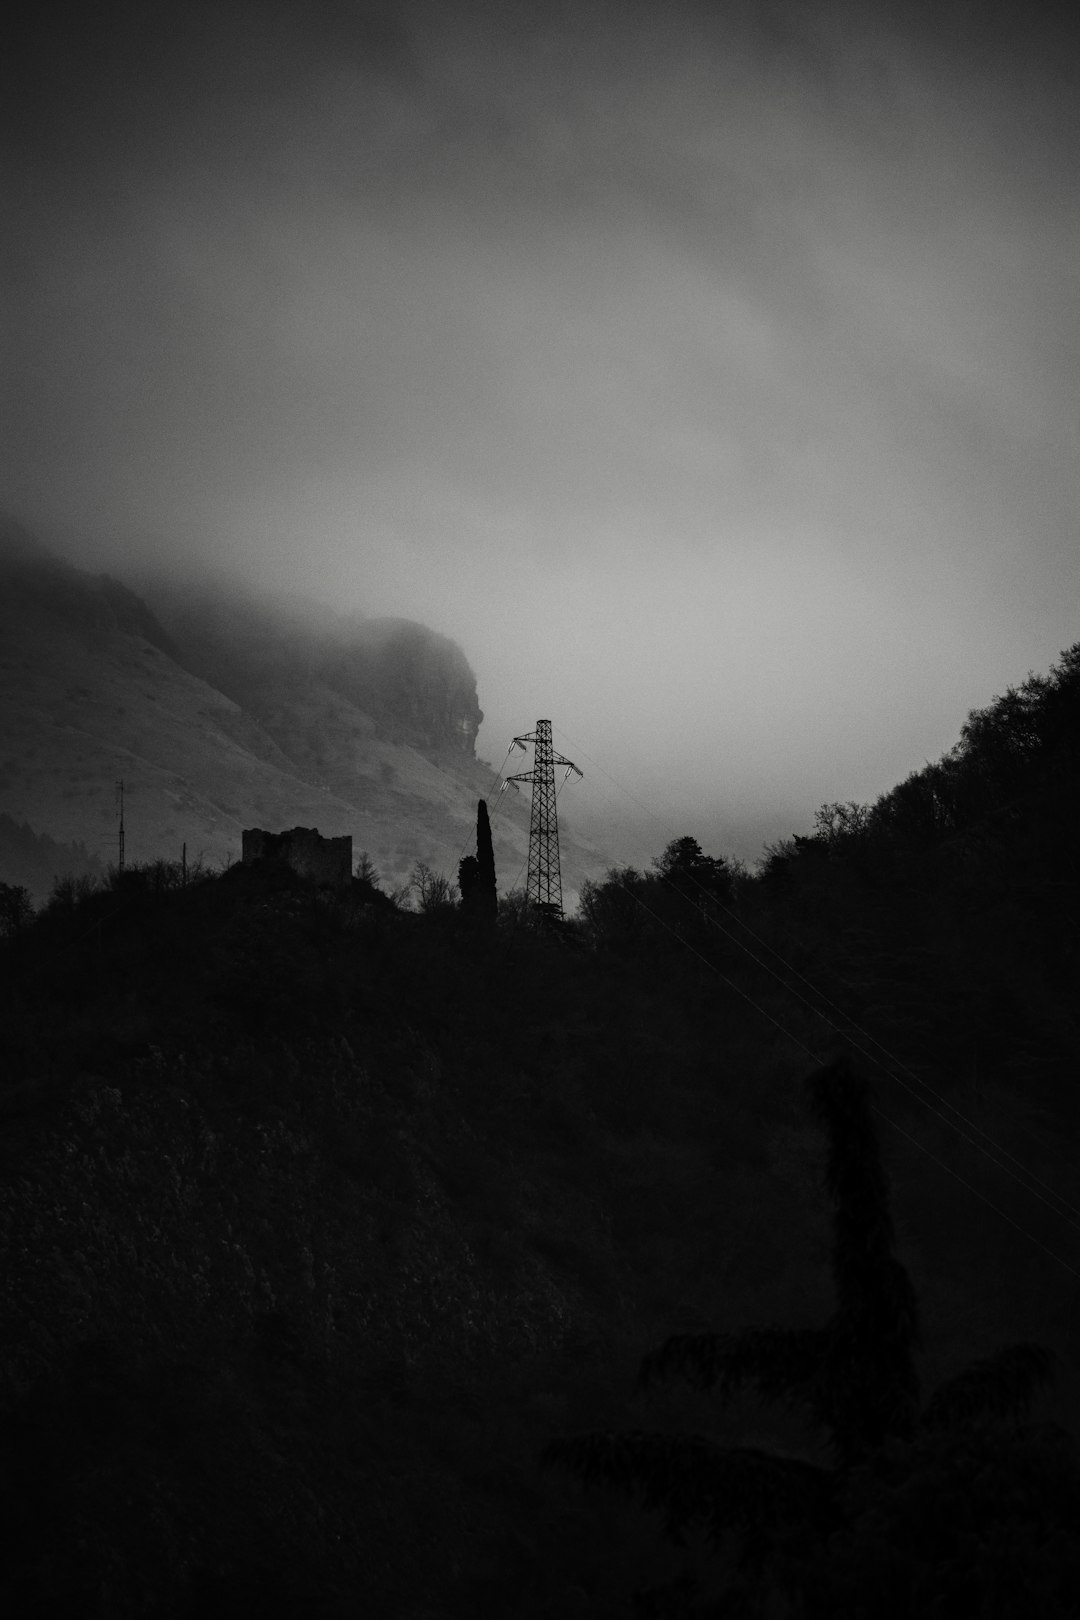 grayscale photo of tower on hill